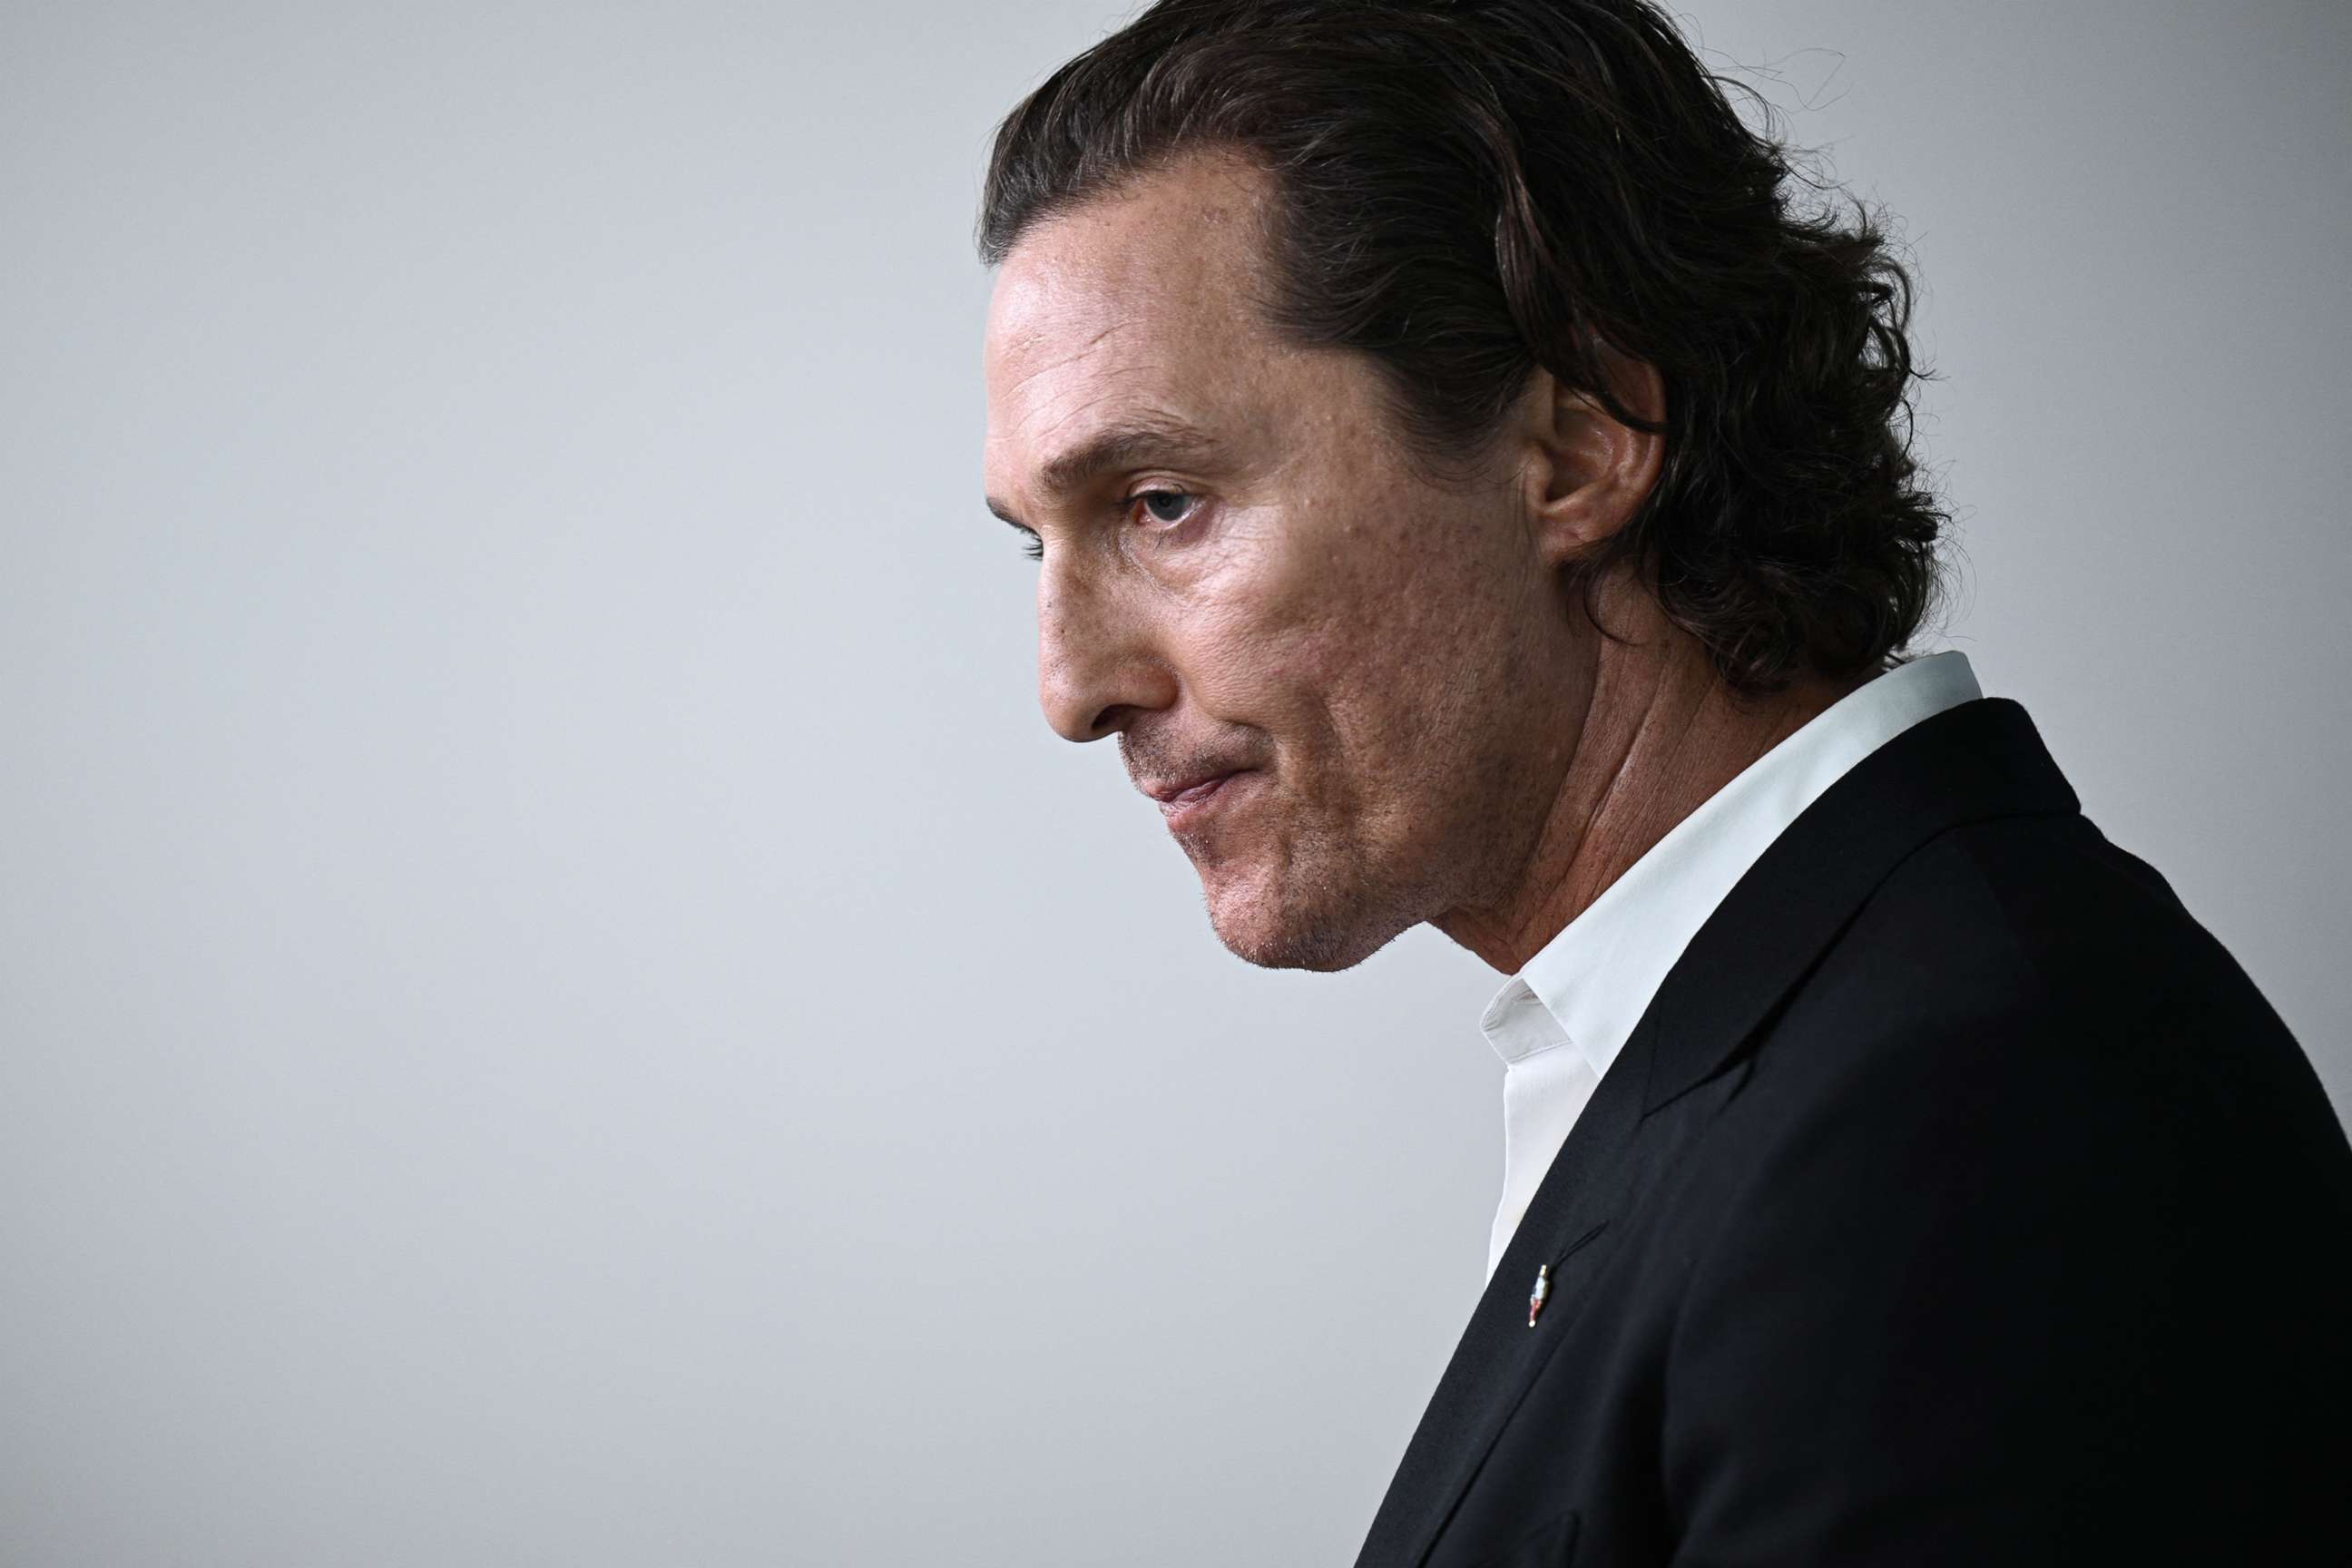 PHOTO: Matthew McConaughey, a native of Uvalde, Texas, speaks during the daily briefing in the James S Brady Press Briefing Room of the White House in Washington, June 7, 2022.